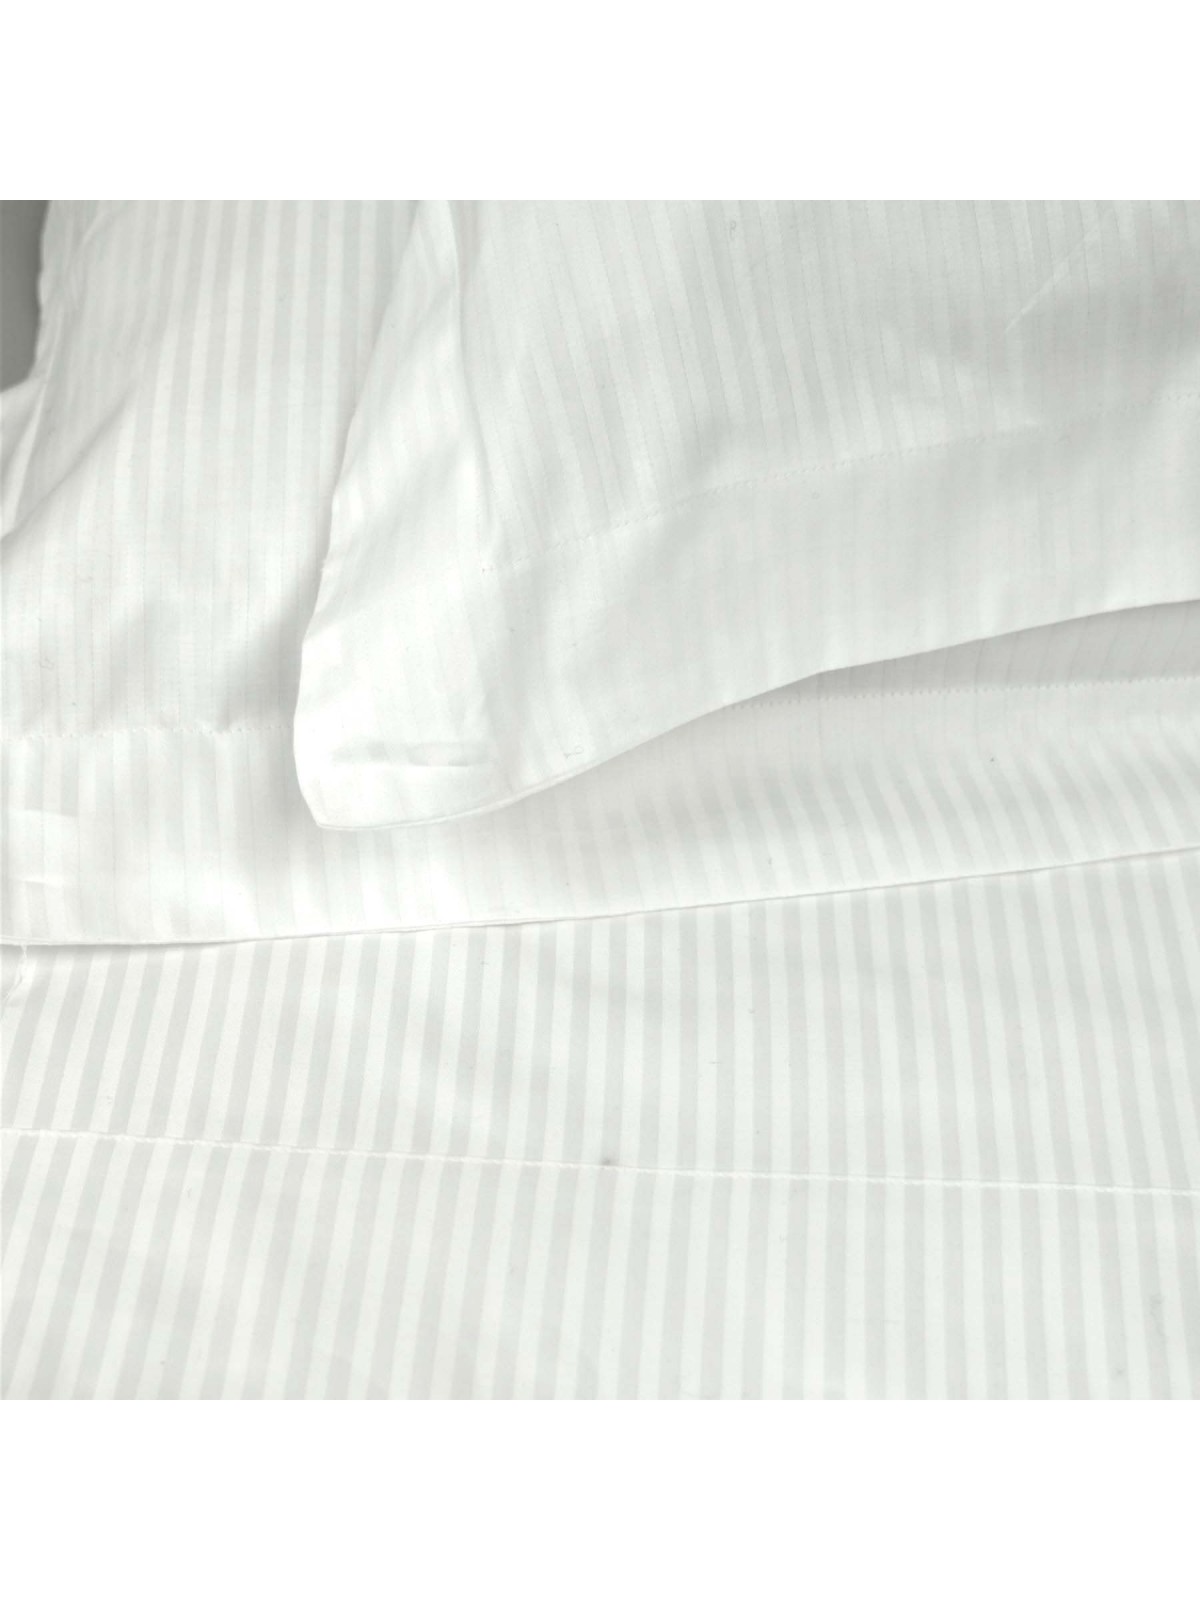 Cotton Satin Sheets with Small Stripes